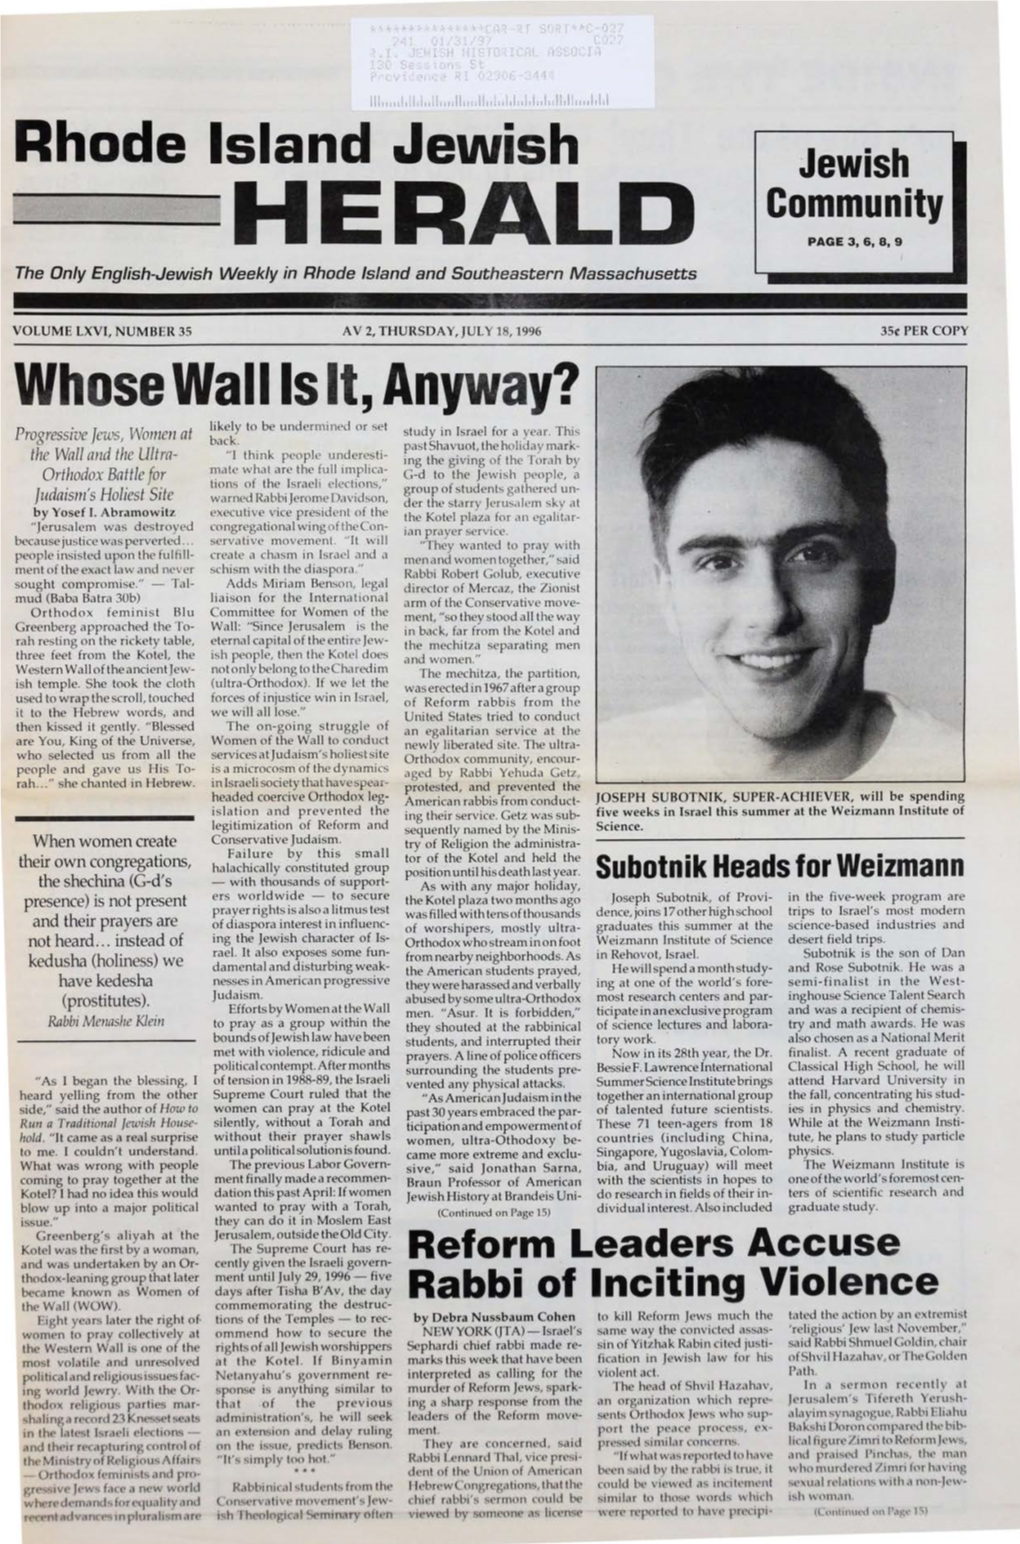 JULY 18, 1996 35¢ PER COPY Whose Wall Ls It, Anyway? Progressive Jews, Women at Likely to Be Undermined Or Set Study in Israel for a Year